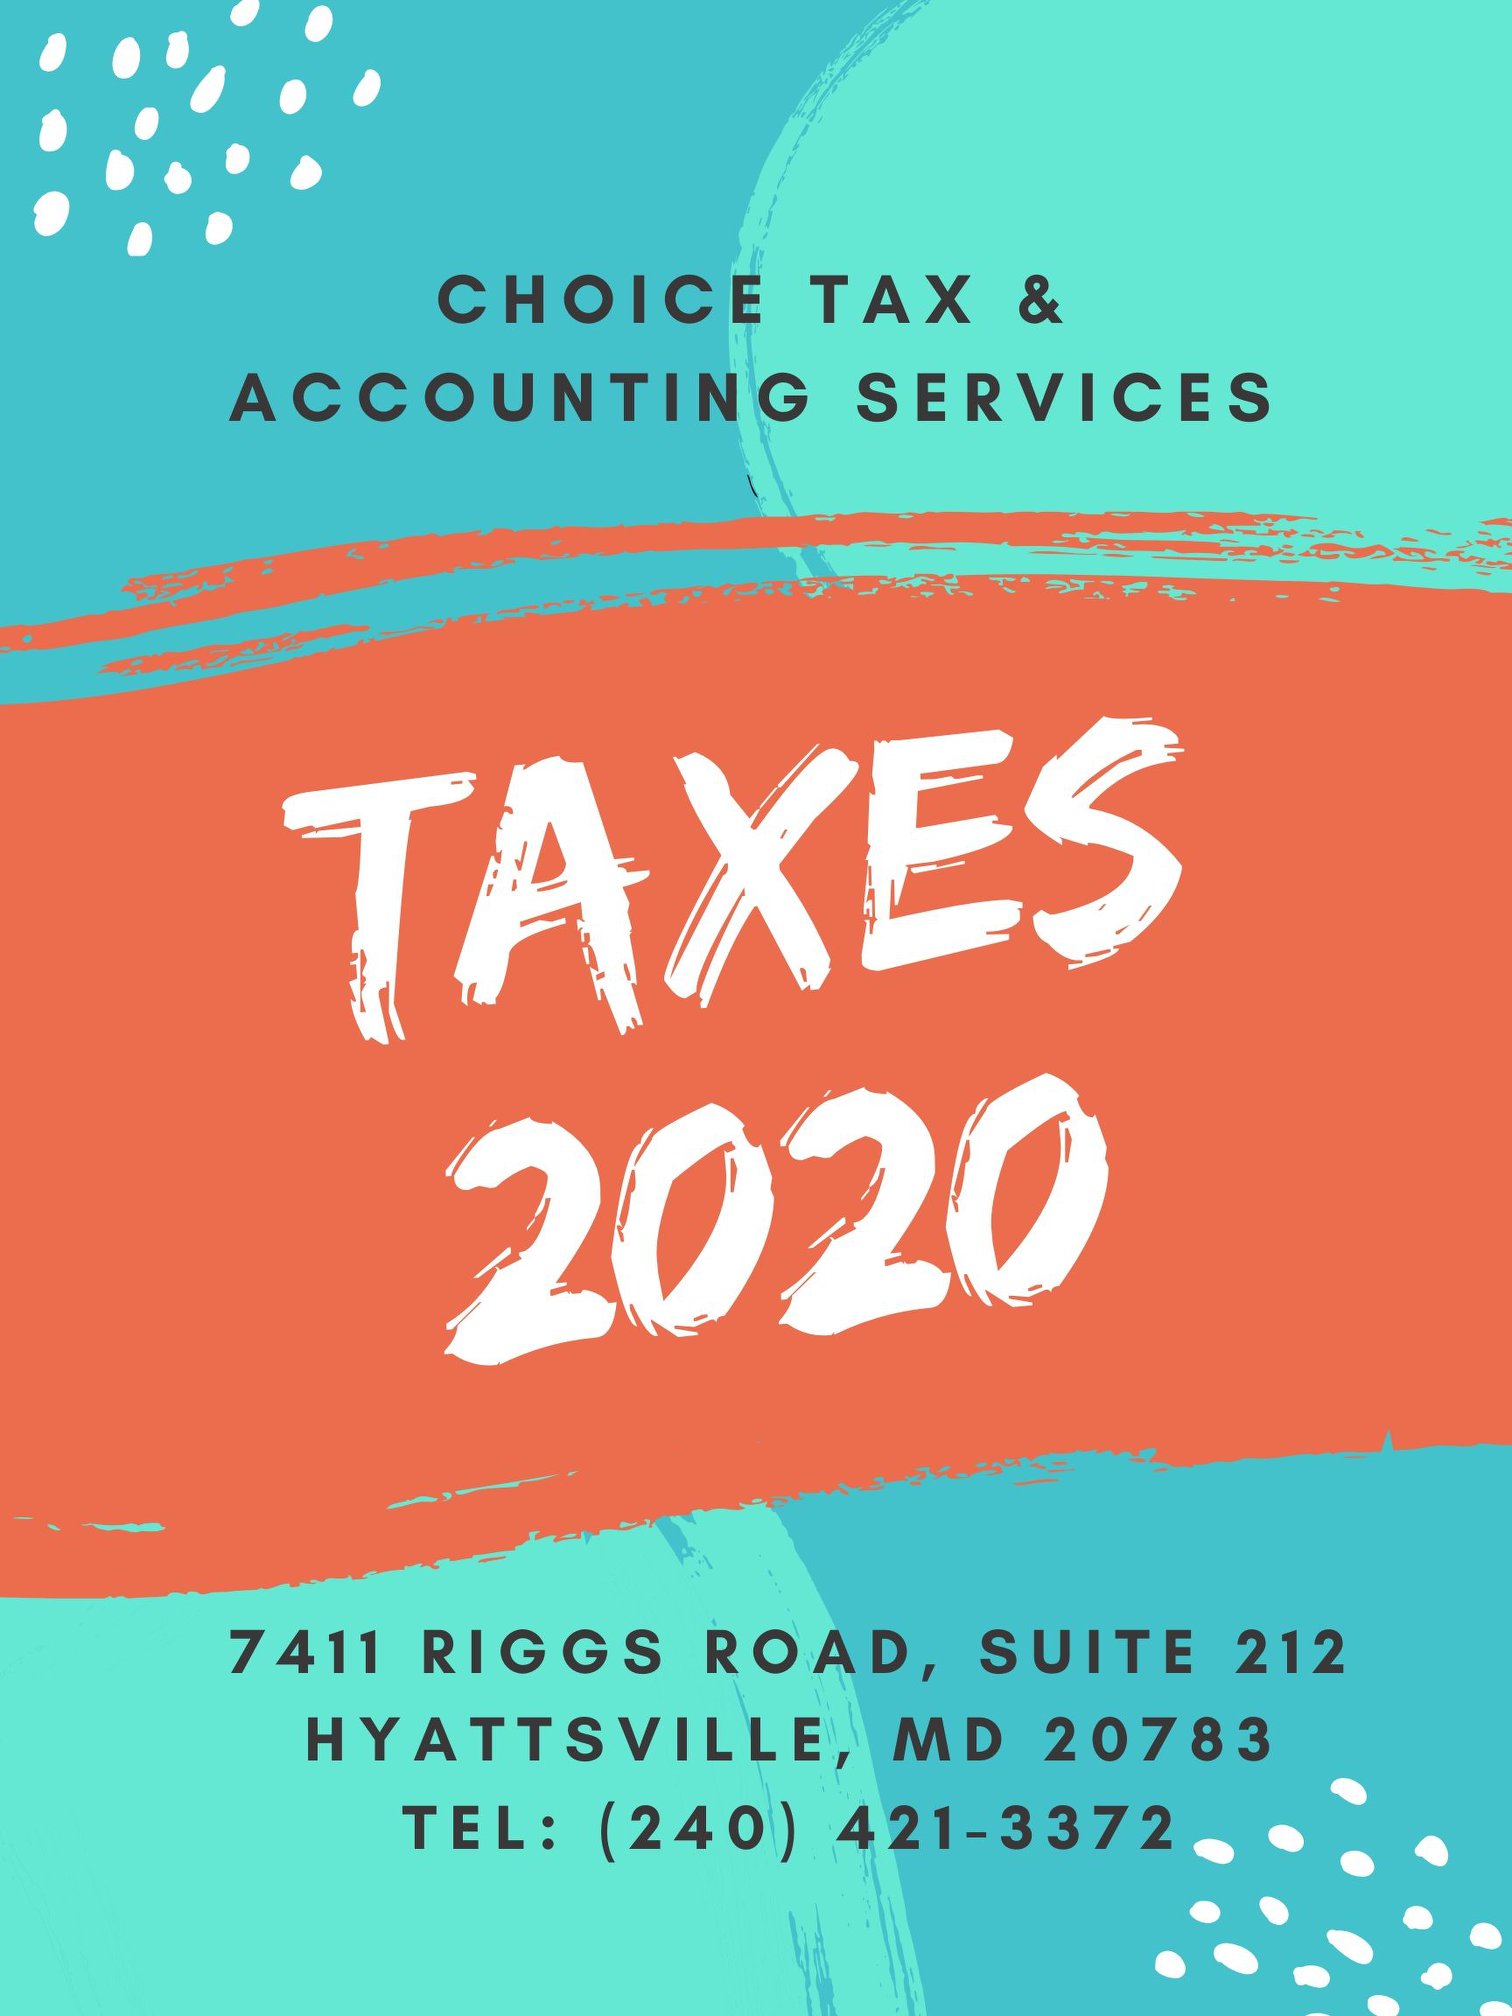 1 Tax & Accounting Services